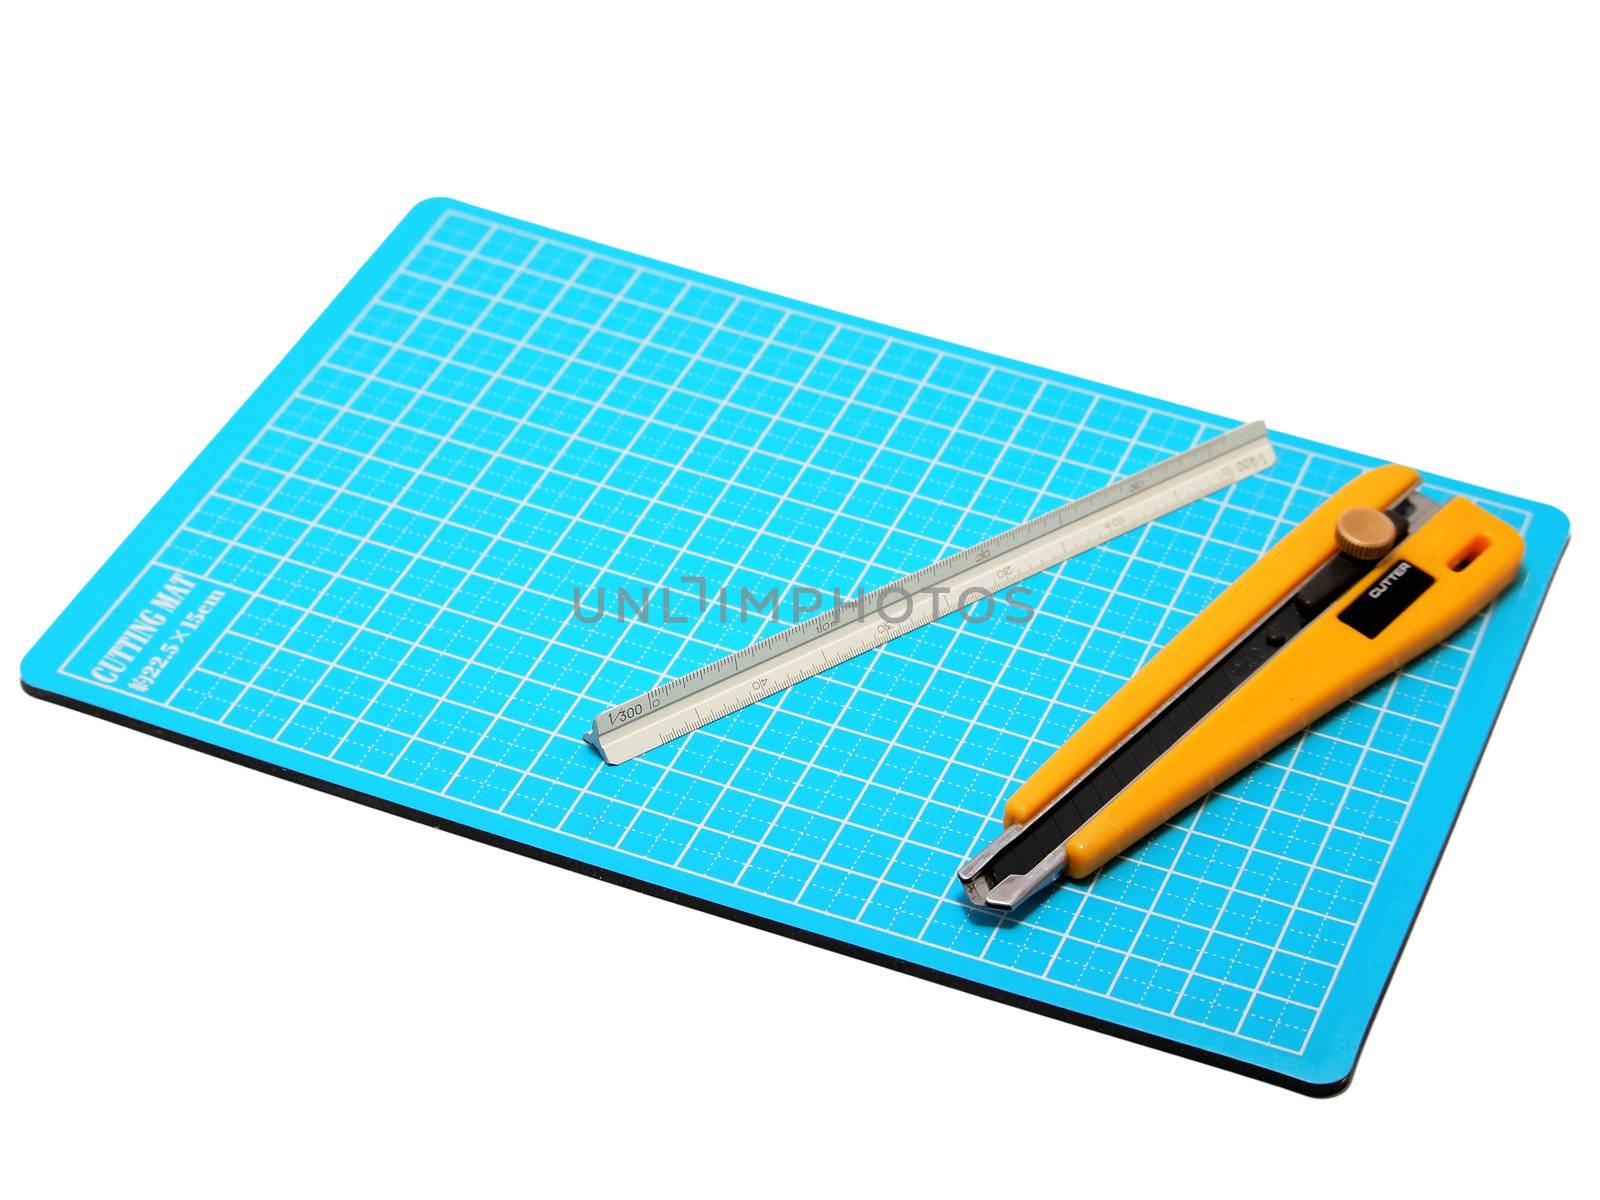 Cutter and Scale placed on blue cutting mat.